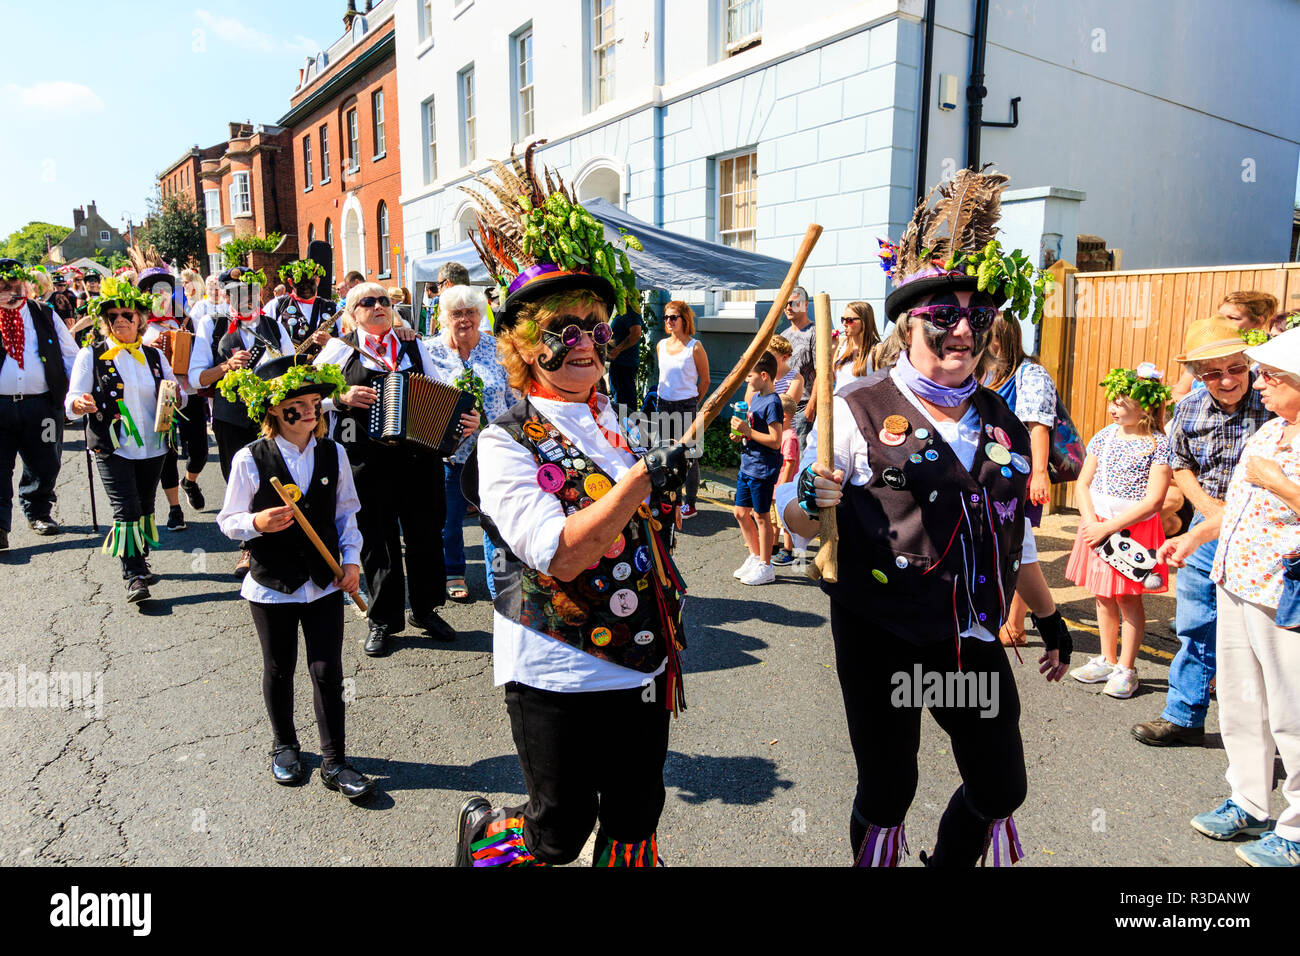 Faversham hop festival. Parade, Dead Horse and the broomdashers Morris side, with blacked faces, walking towards viewer along street in bright sunshin Stock Photo